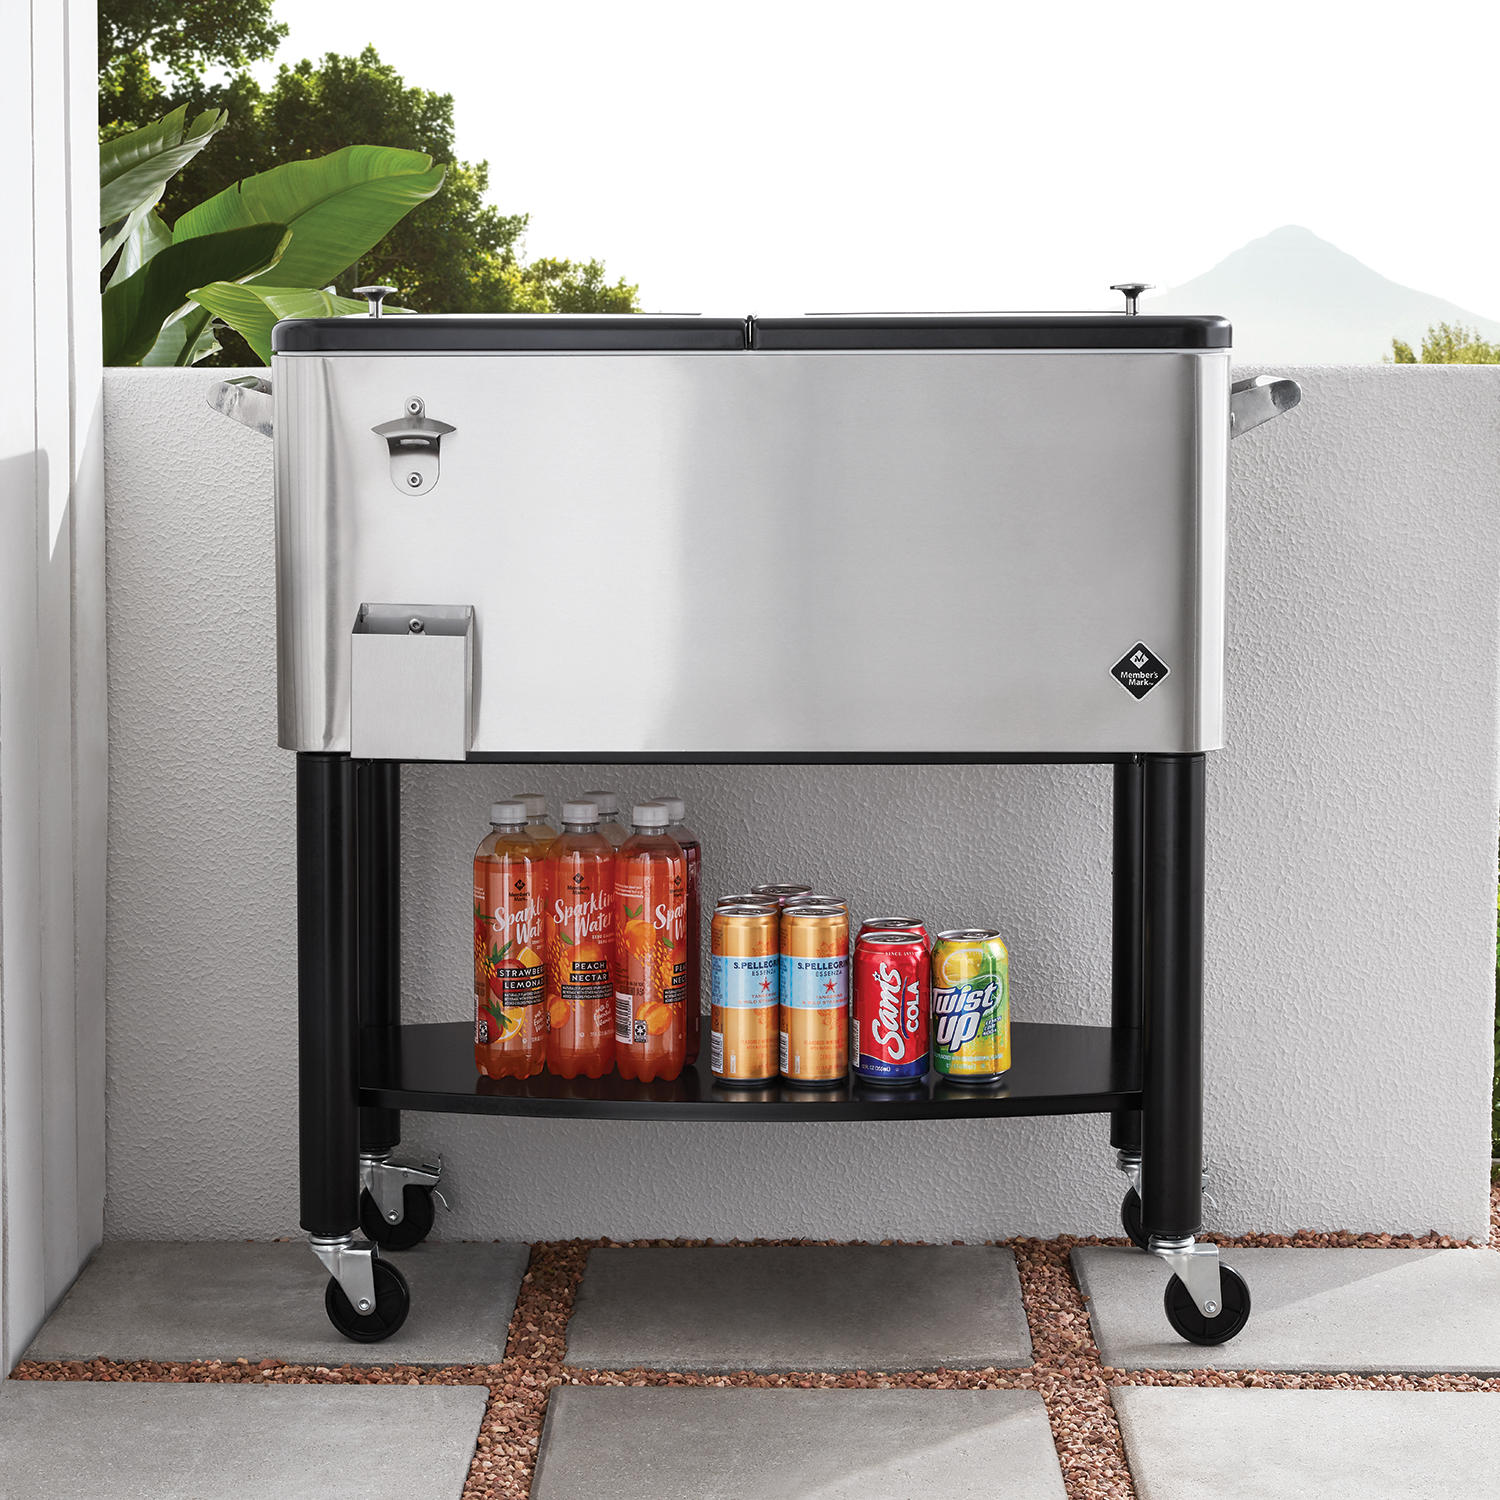 80Qt Member's Mark 80-Qt. Stainless Steel Cooler with Cover - $69.91 at Sam's Club B&M, YMMV